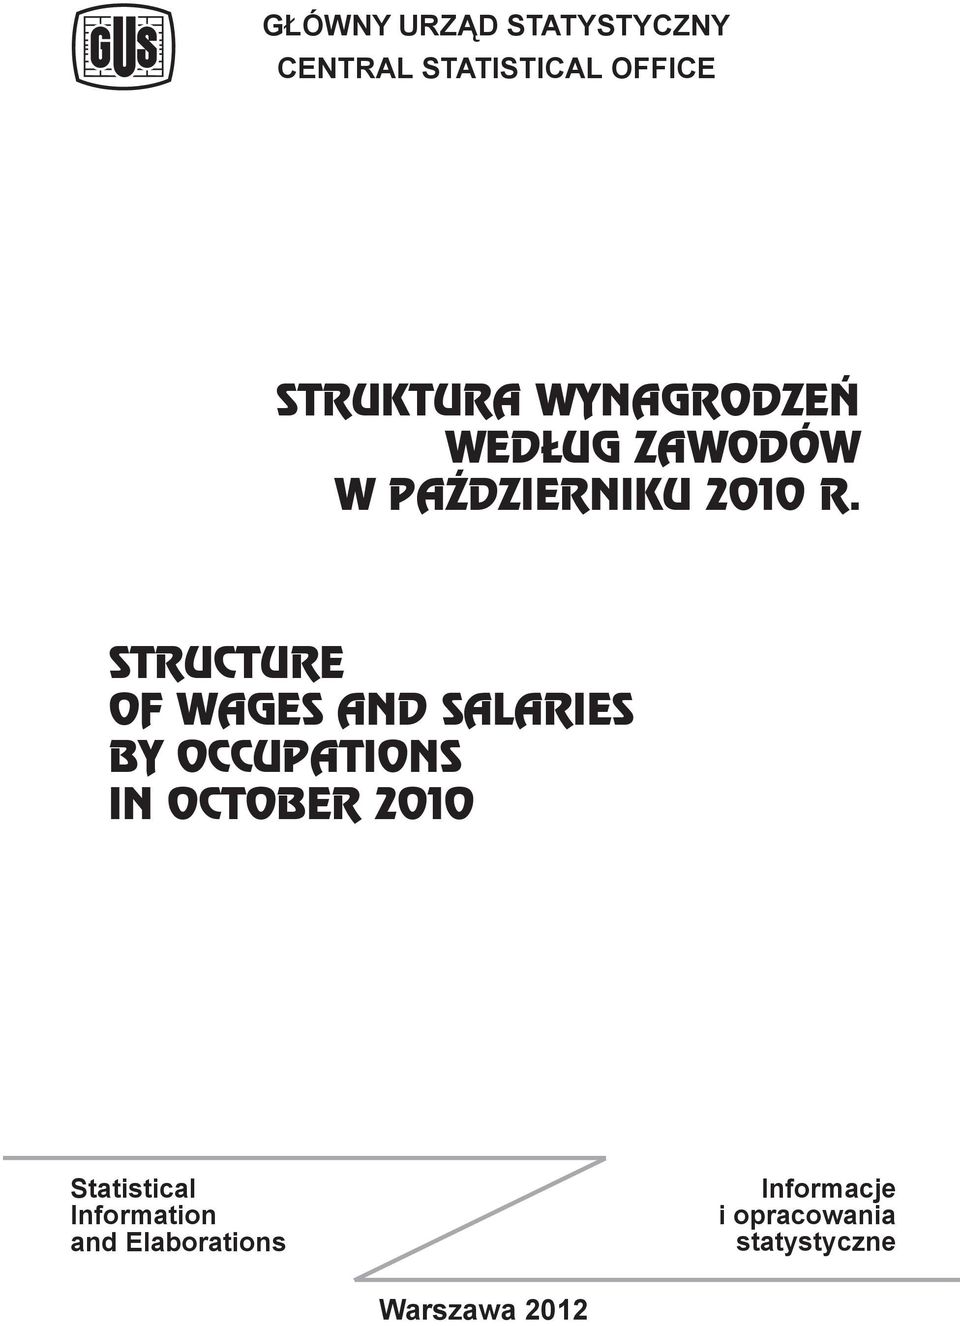 STRUCTURE OF WAGES AND SALARIES BY OCCUPATIONS IN OCTOBER 2010